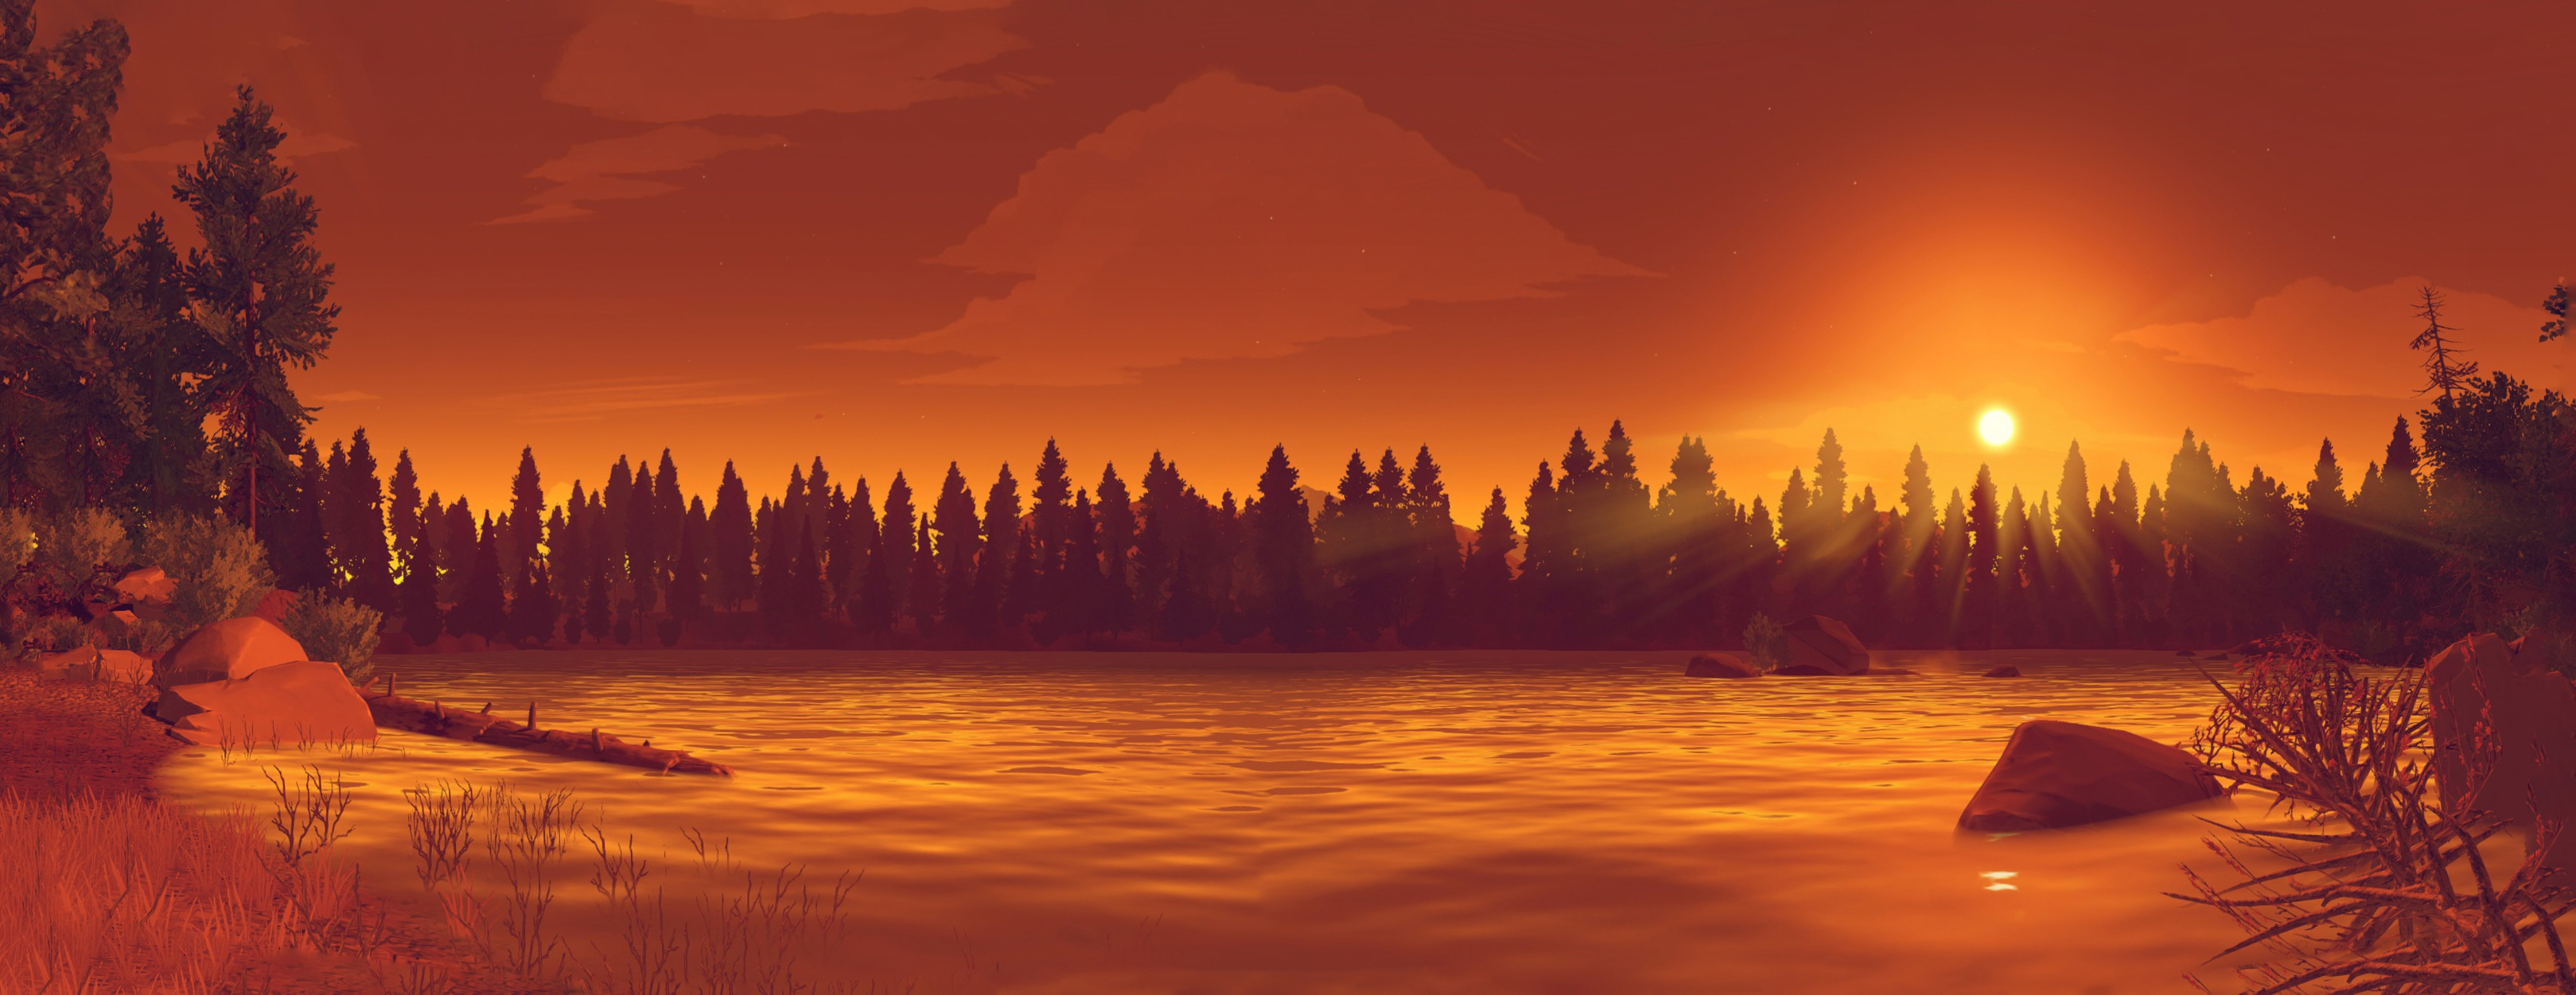 firewatch hd wallpaper,sky,nature,red sky at morning,natural landscape,sunrise